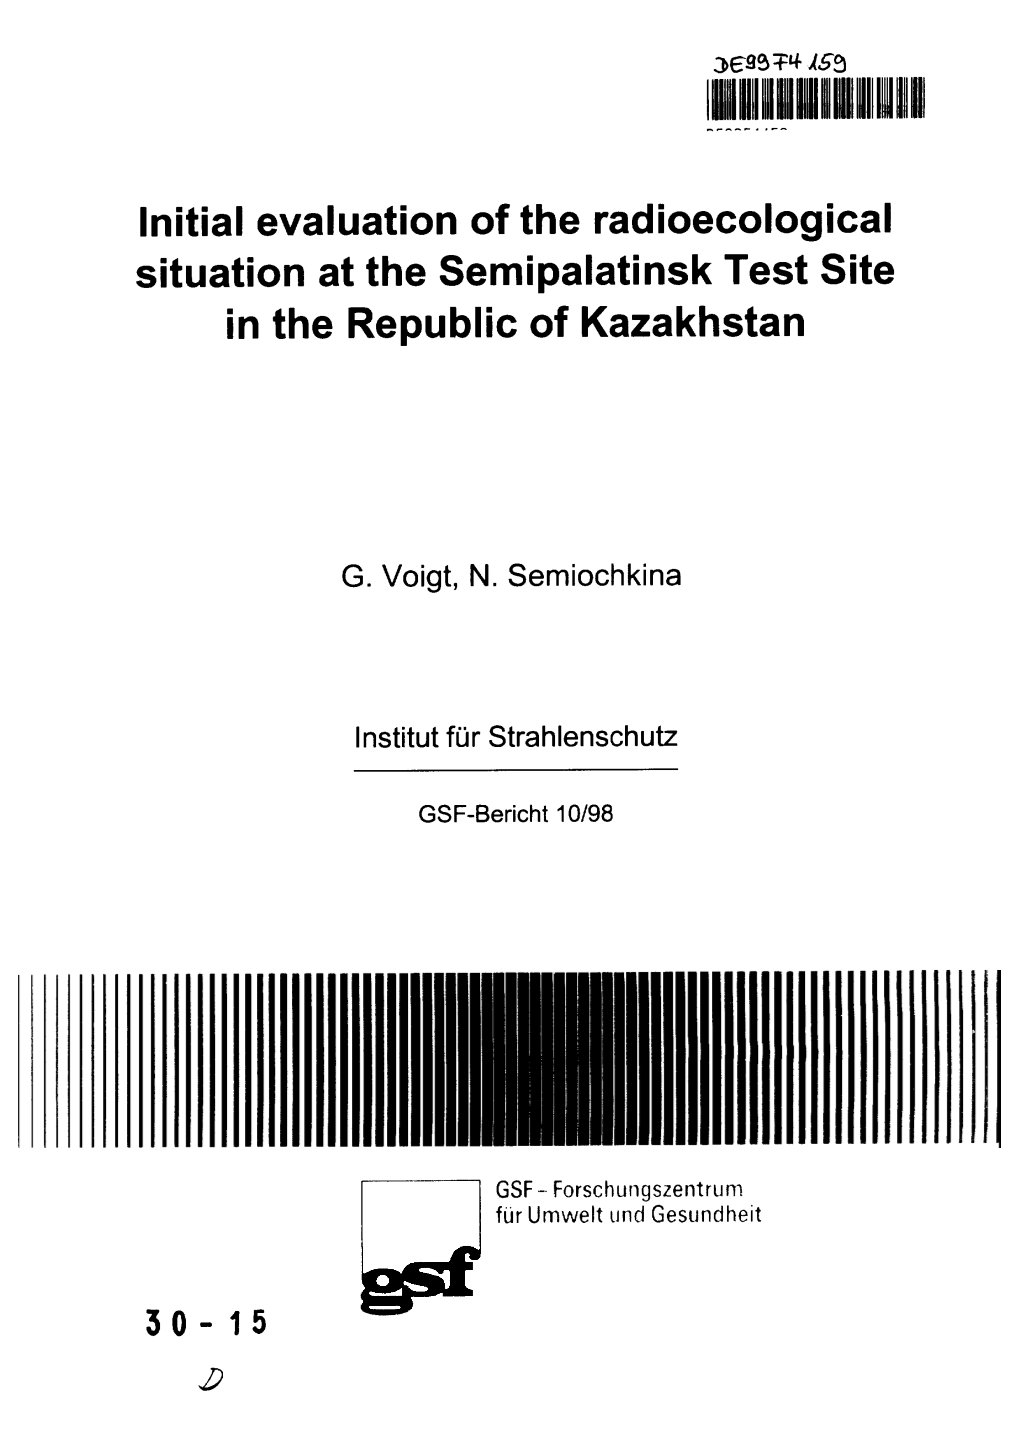 Initial Evaluation of the Radioecological Situation at the Semipalatinsk Test Site in the Republic of Kazakhstan